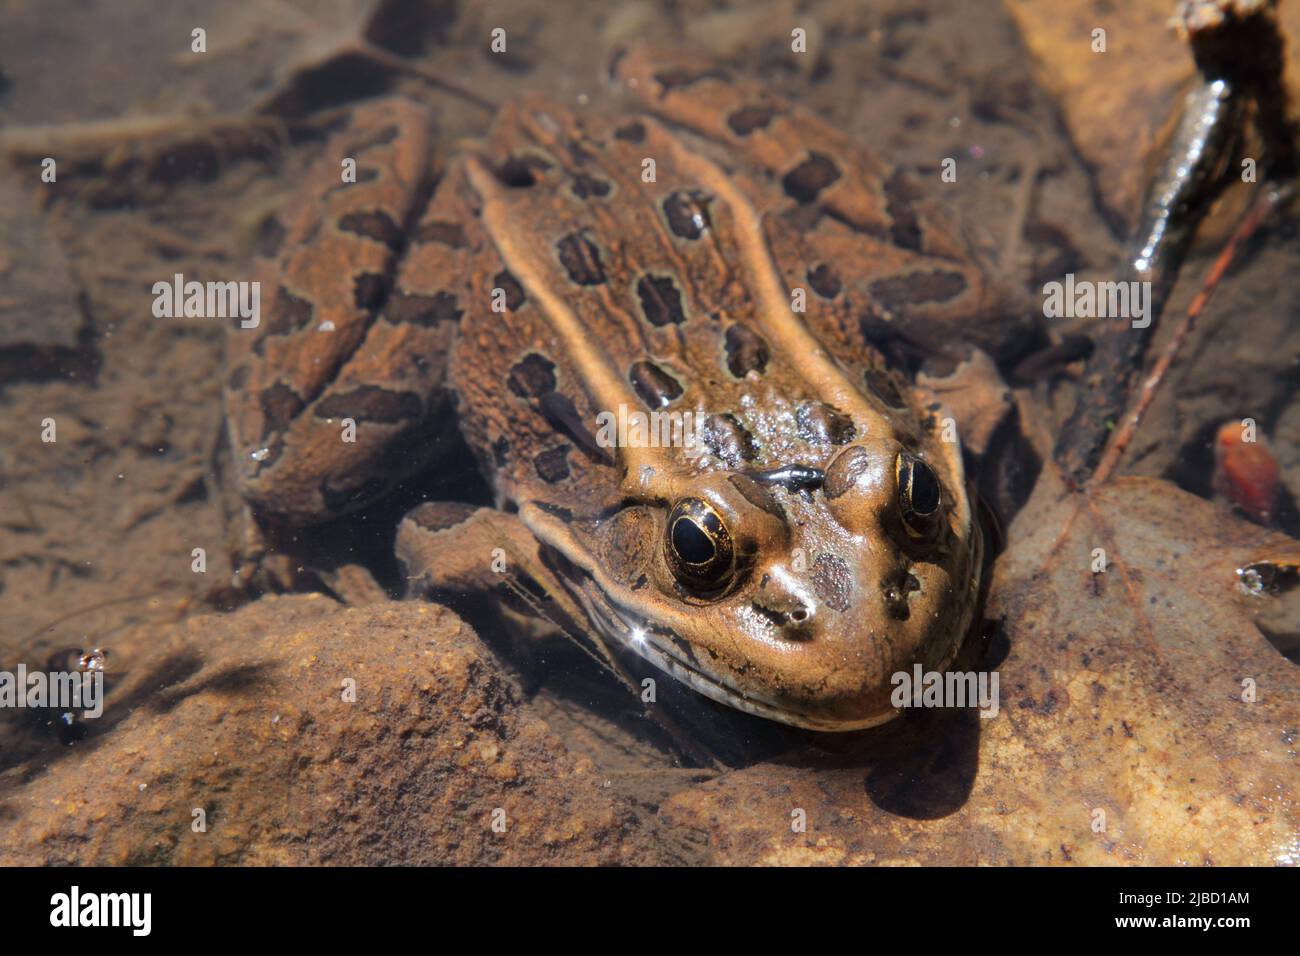 large spotted frog sitting in pond water Stock Photo